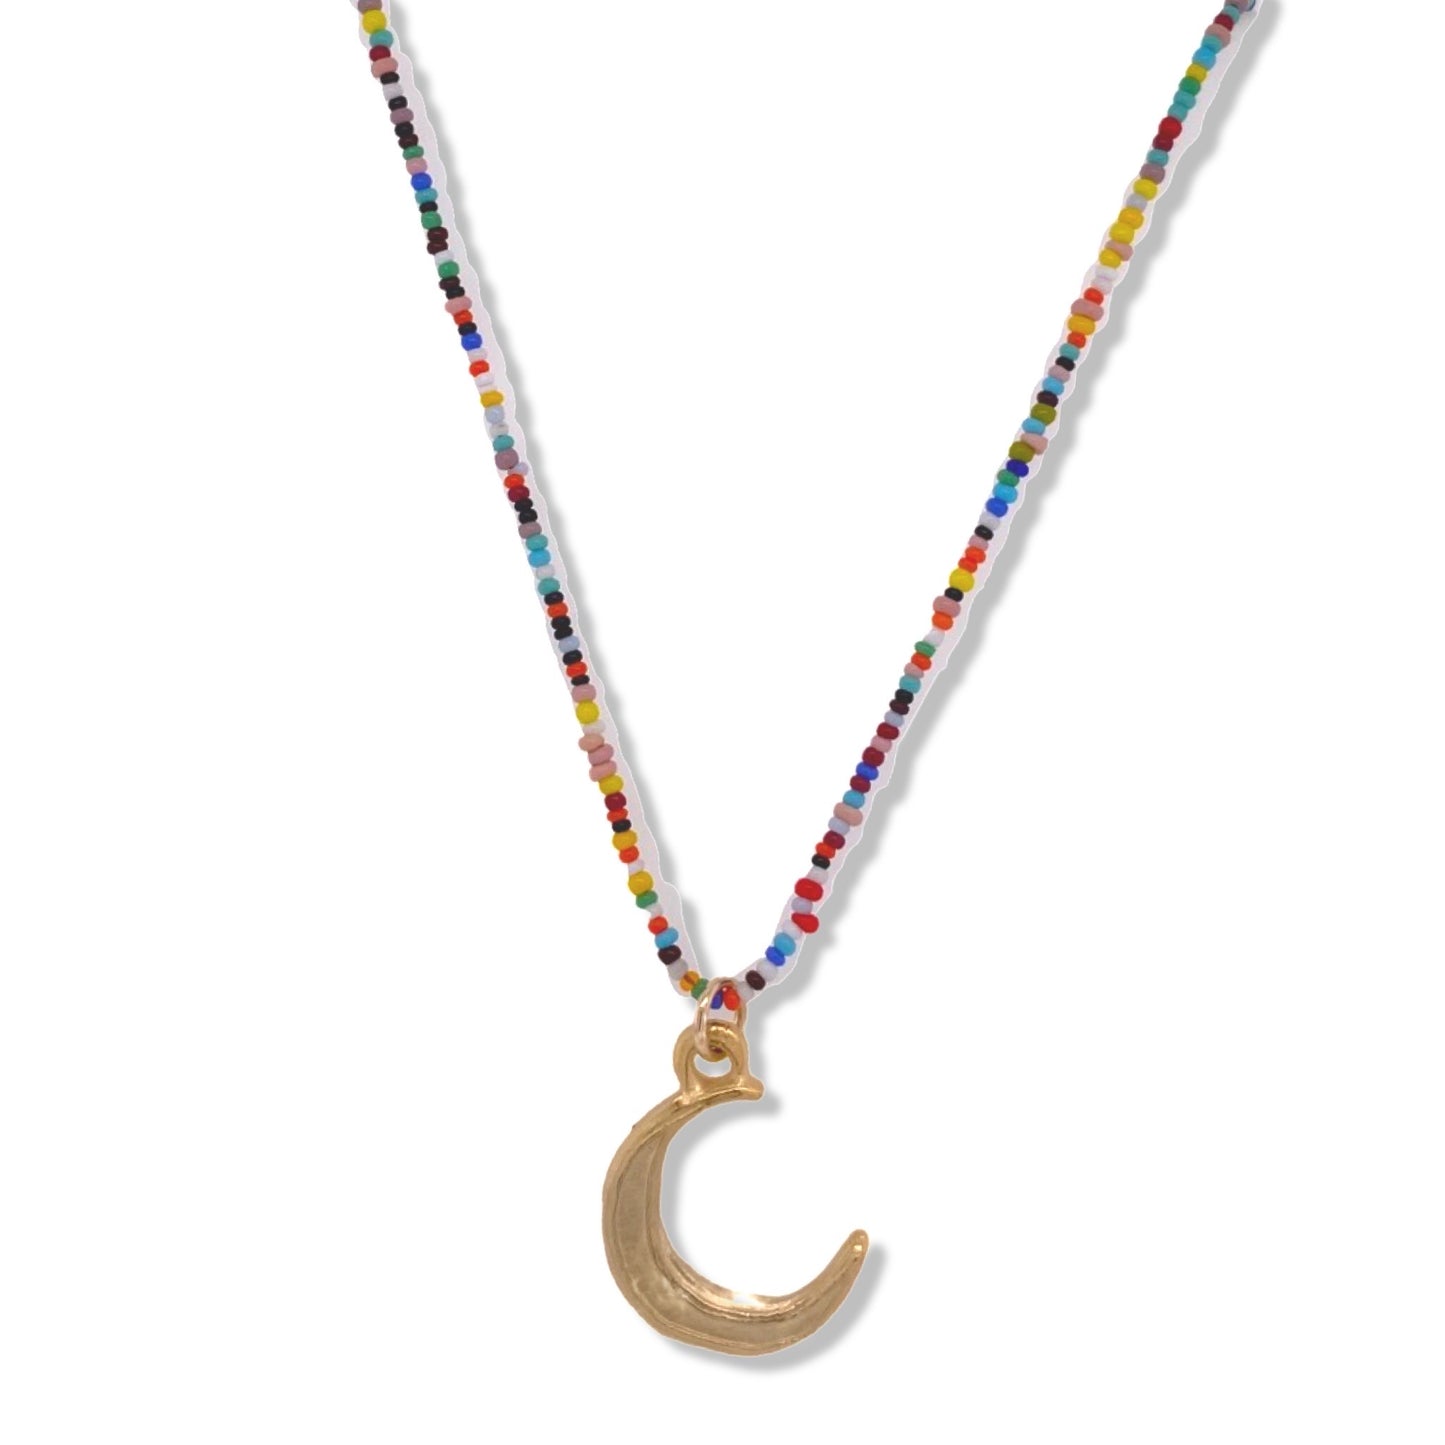 Large Moon Charm Necklace in Gold On Multi Color Beads | Nalu | Nantucket